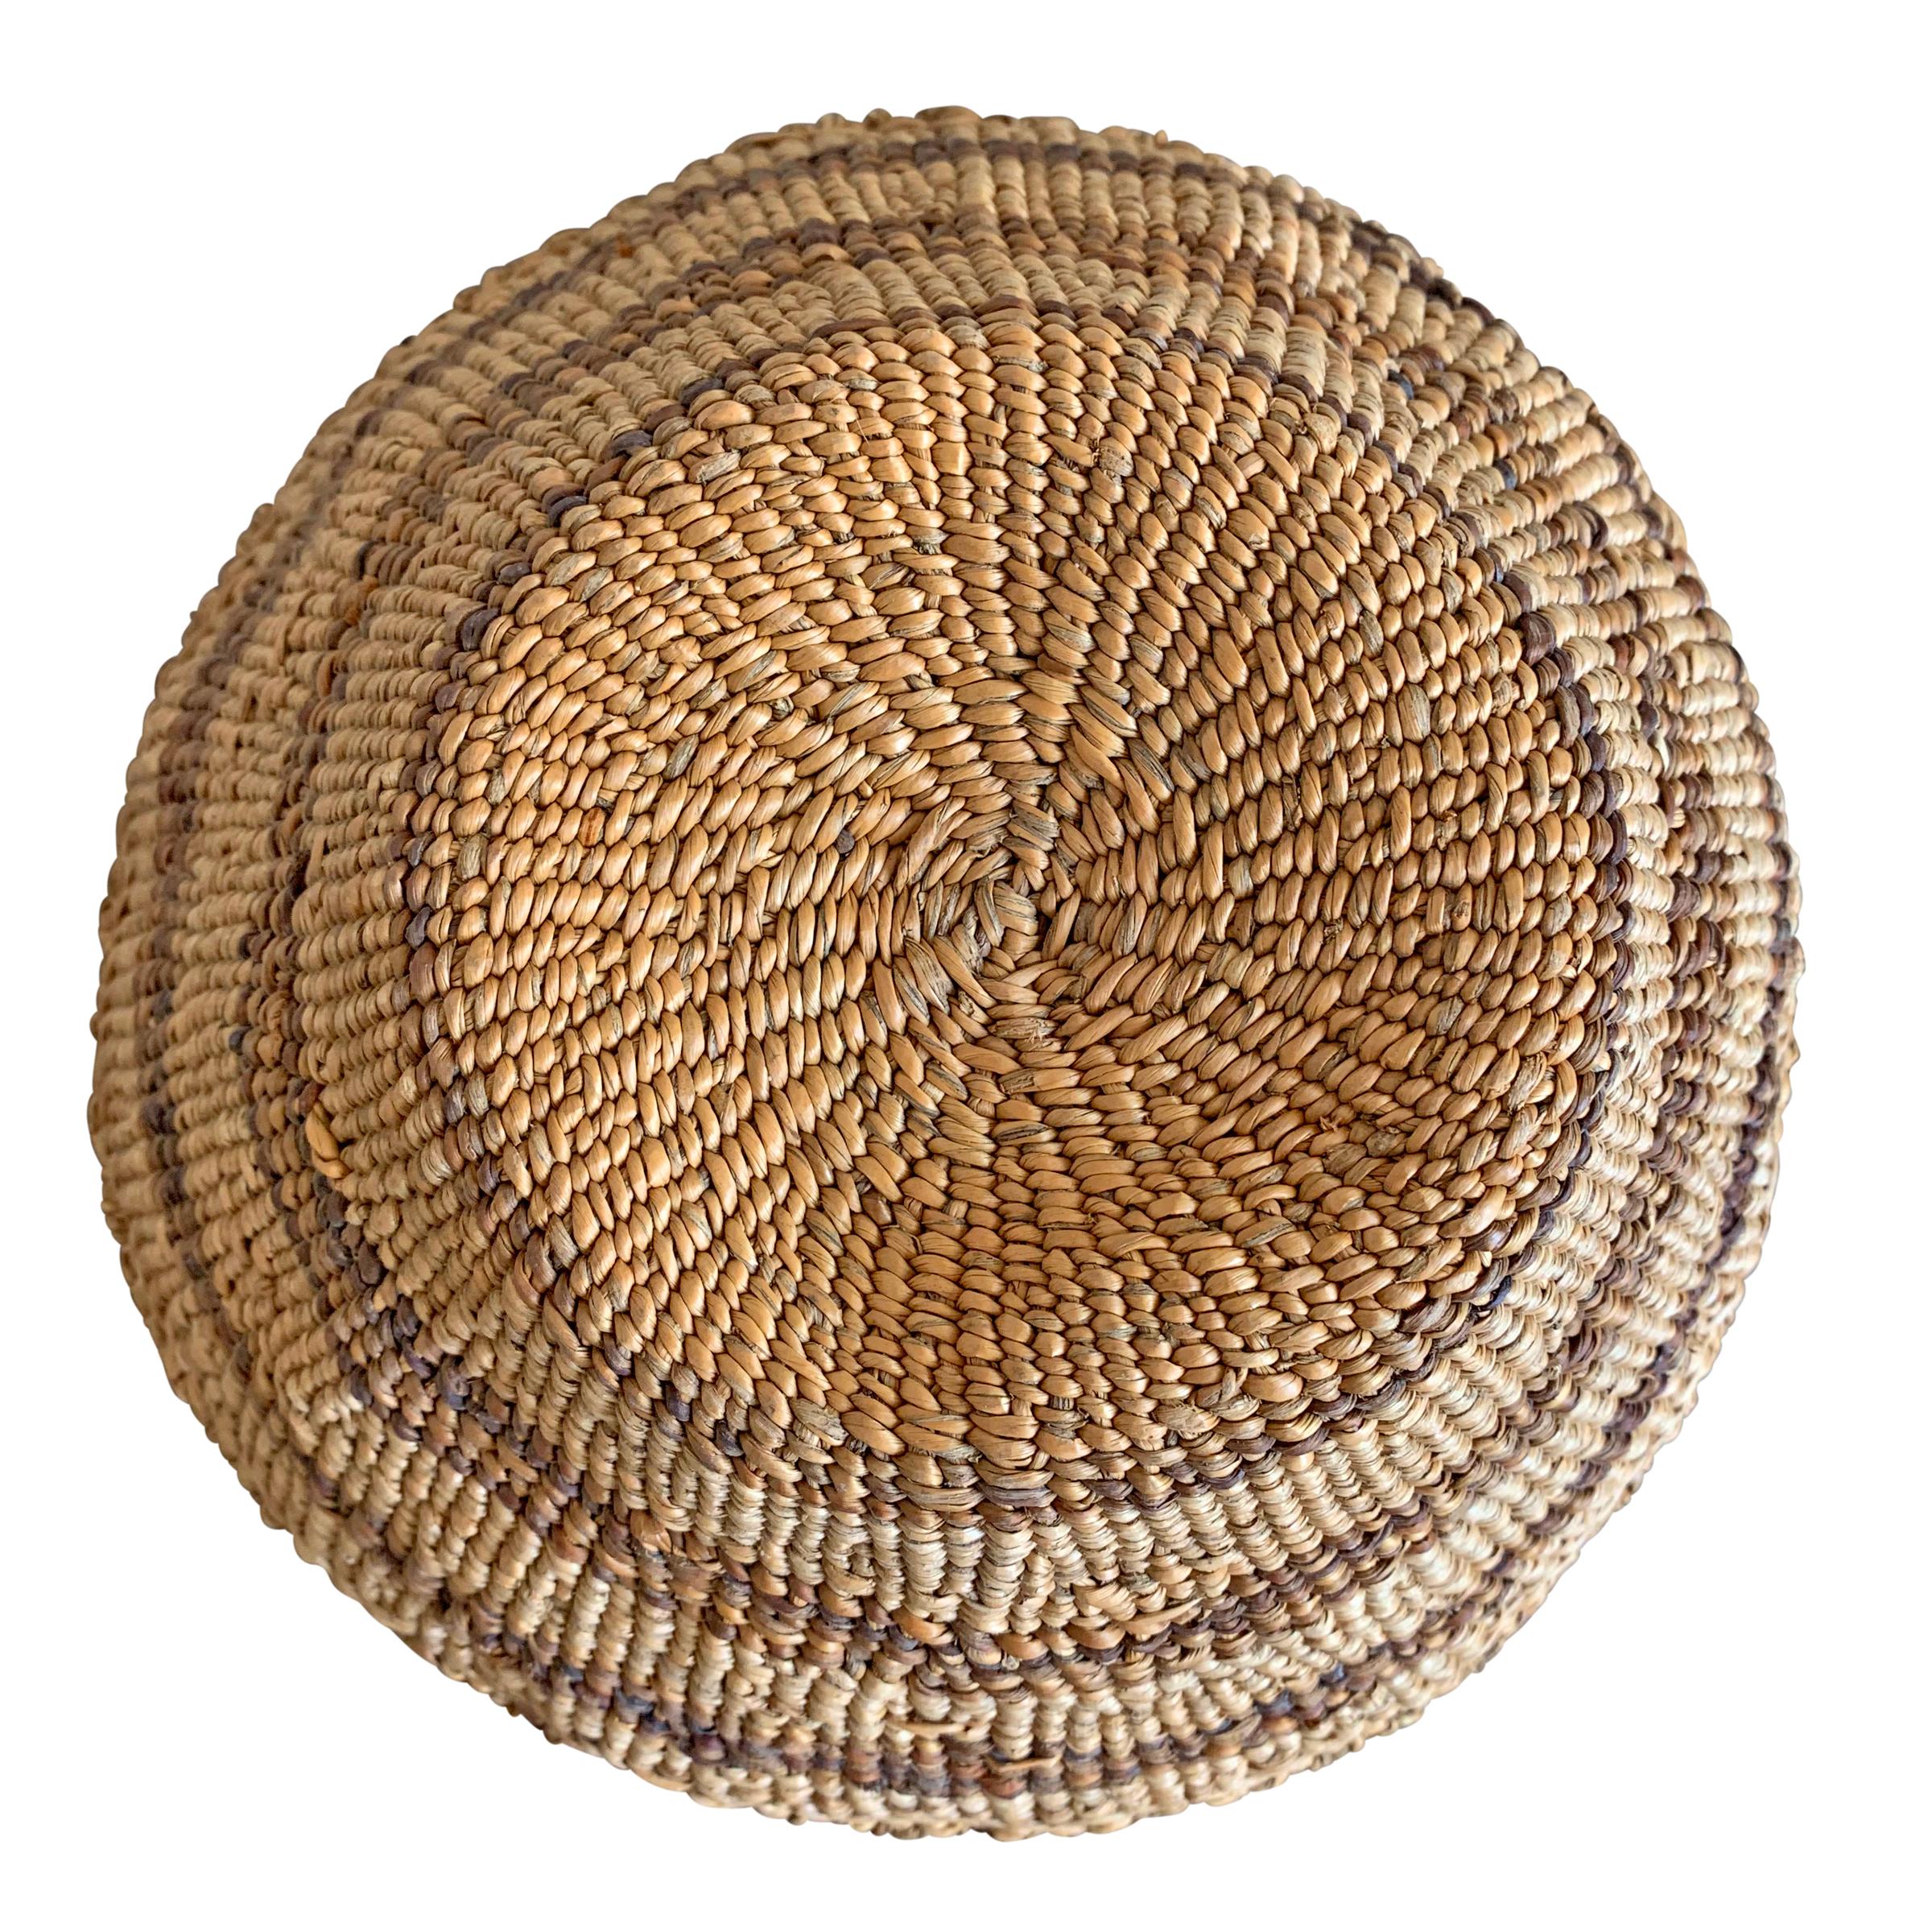 Early 20th Century Pacific NW Native American Basket 7